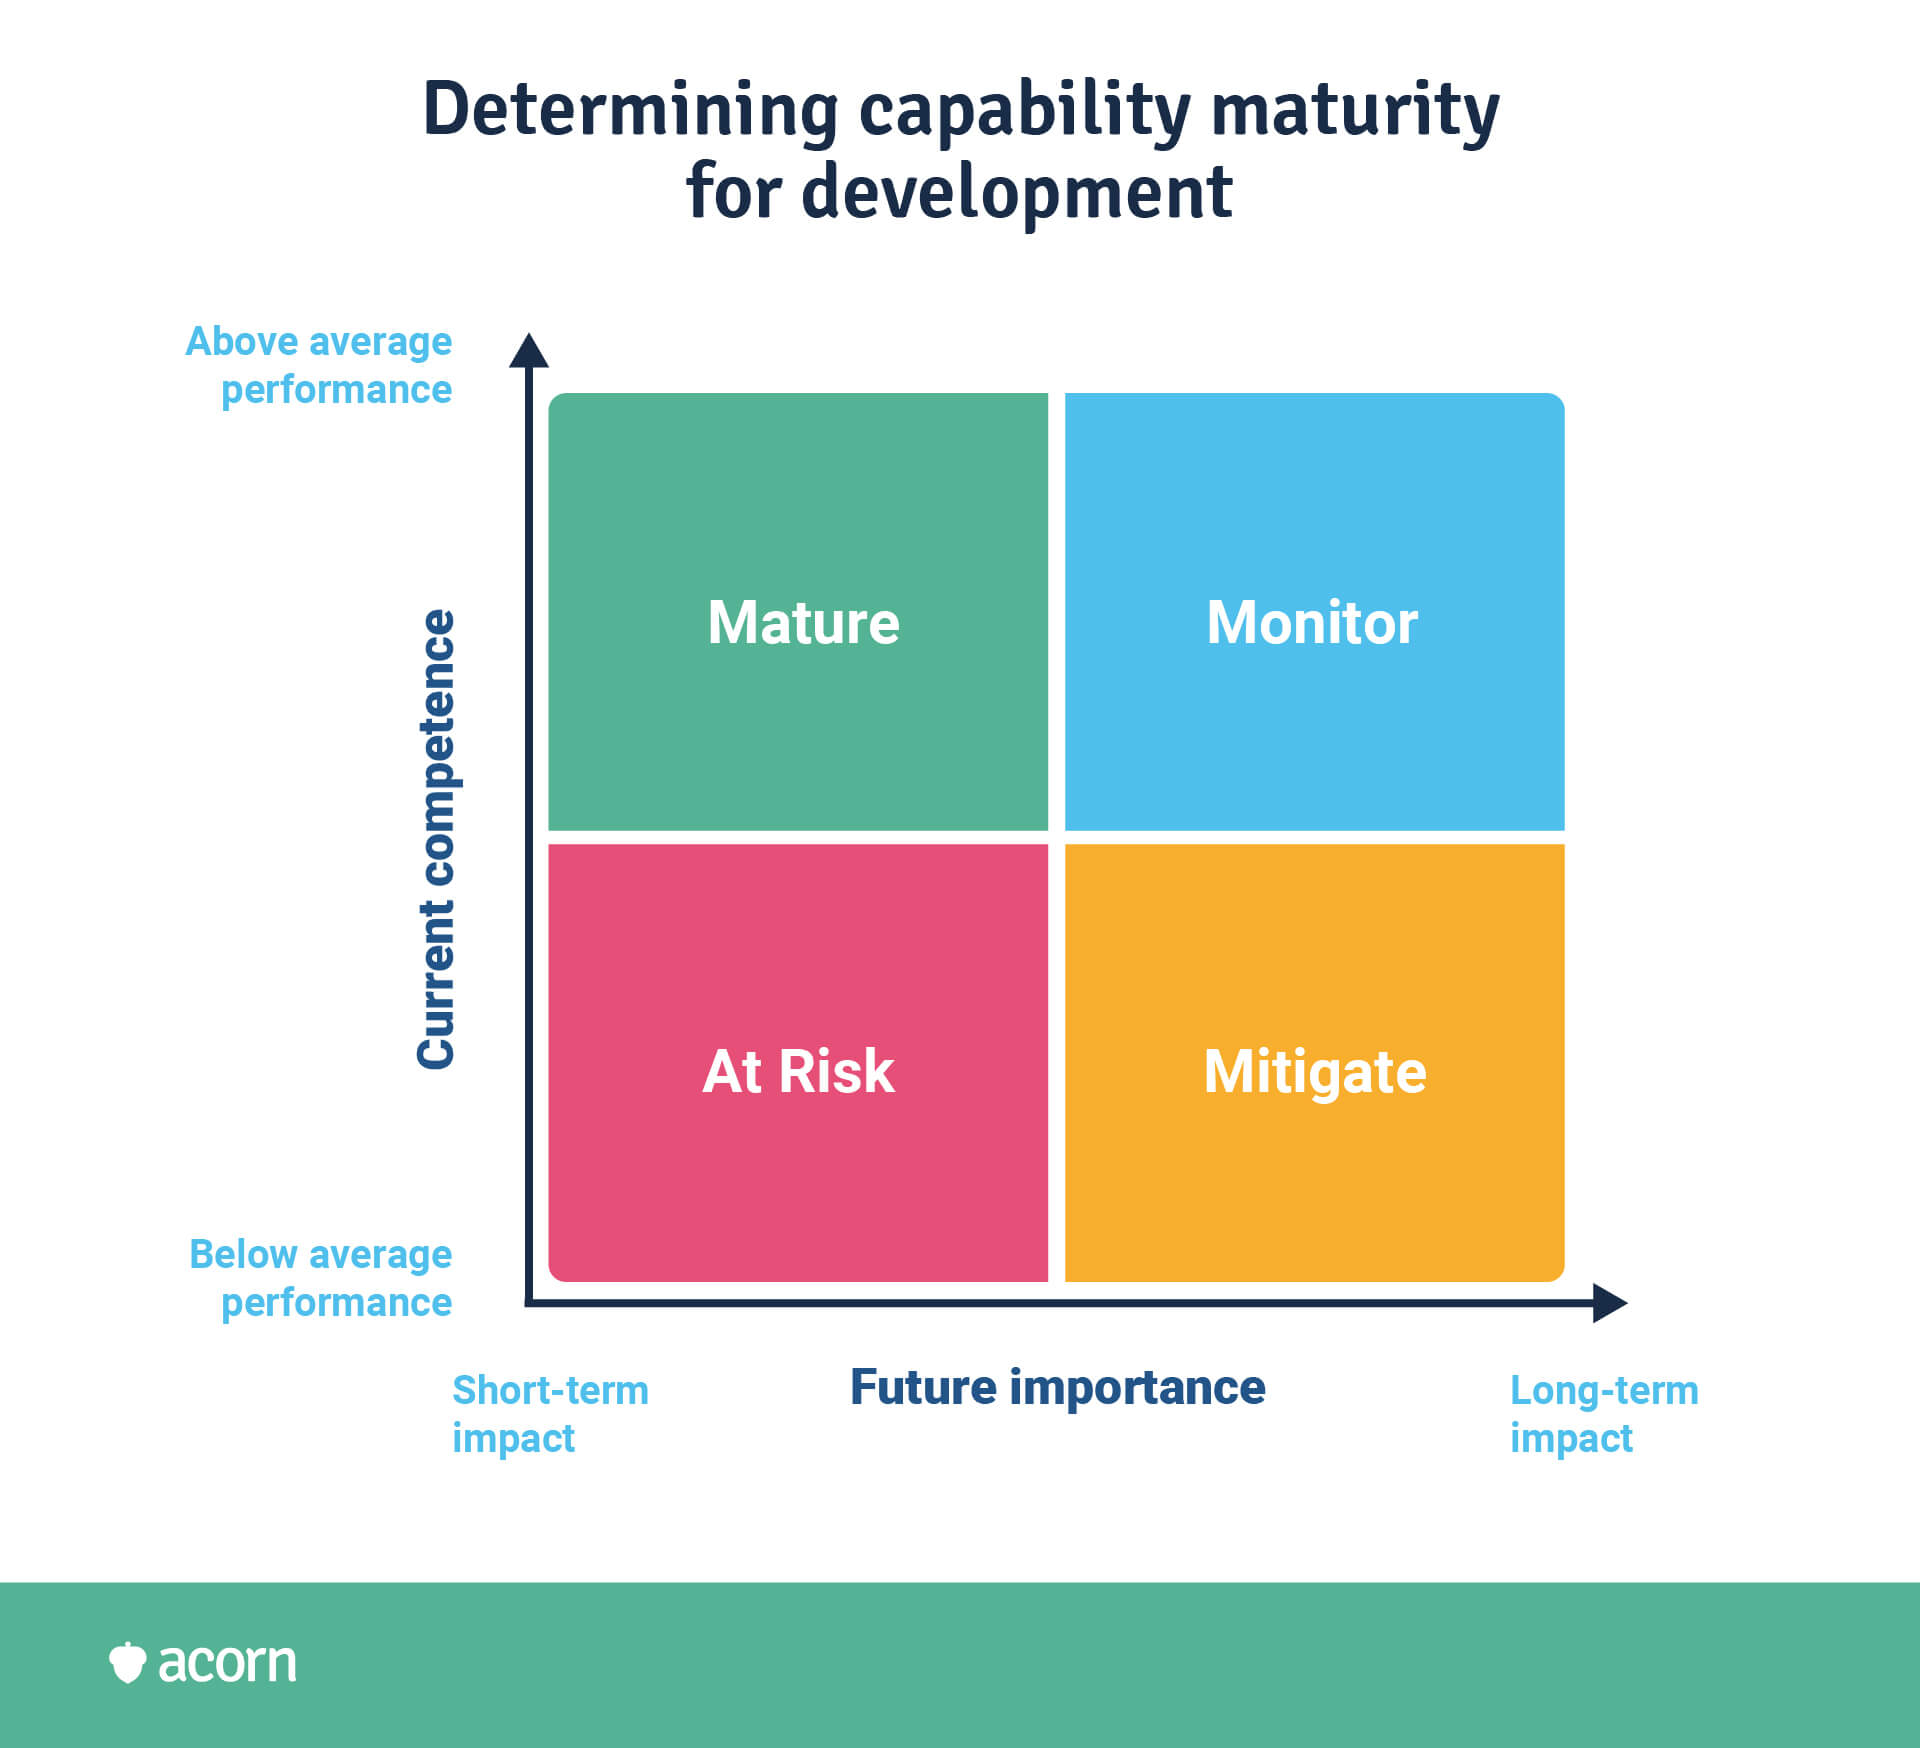 How to calculate capability maturity